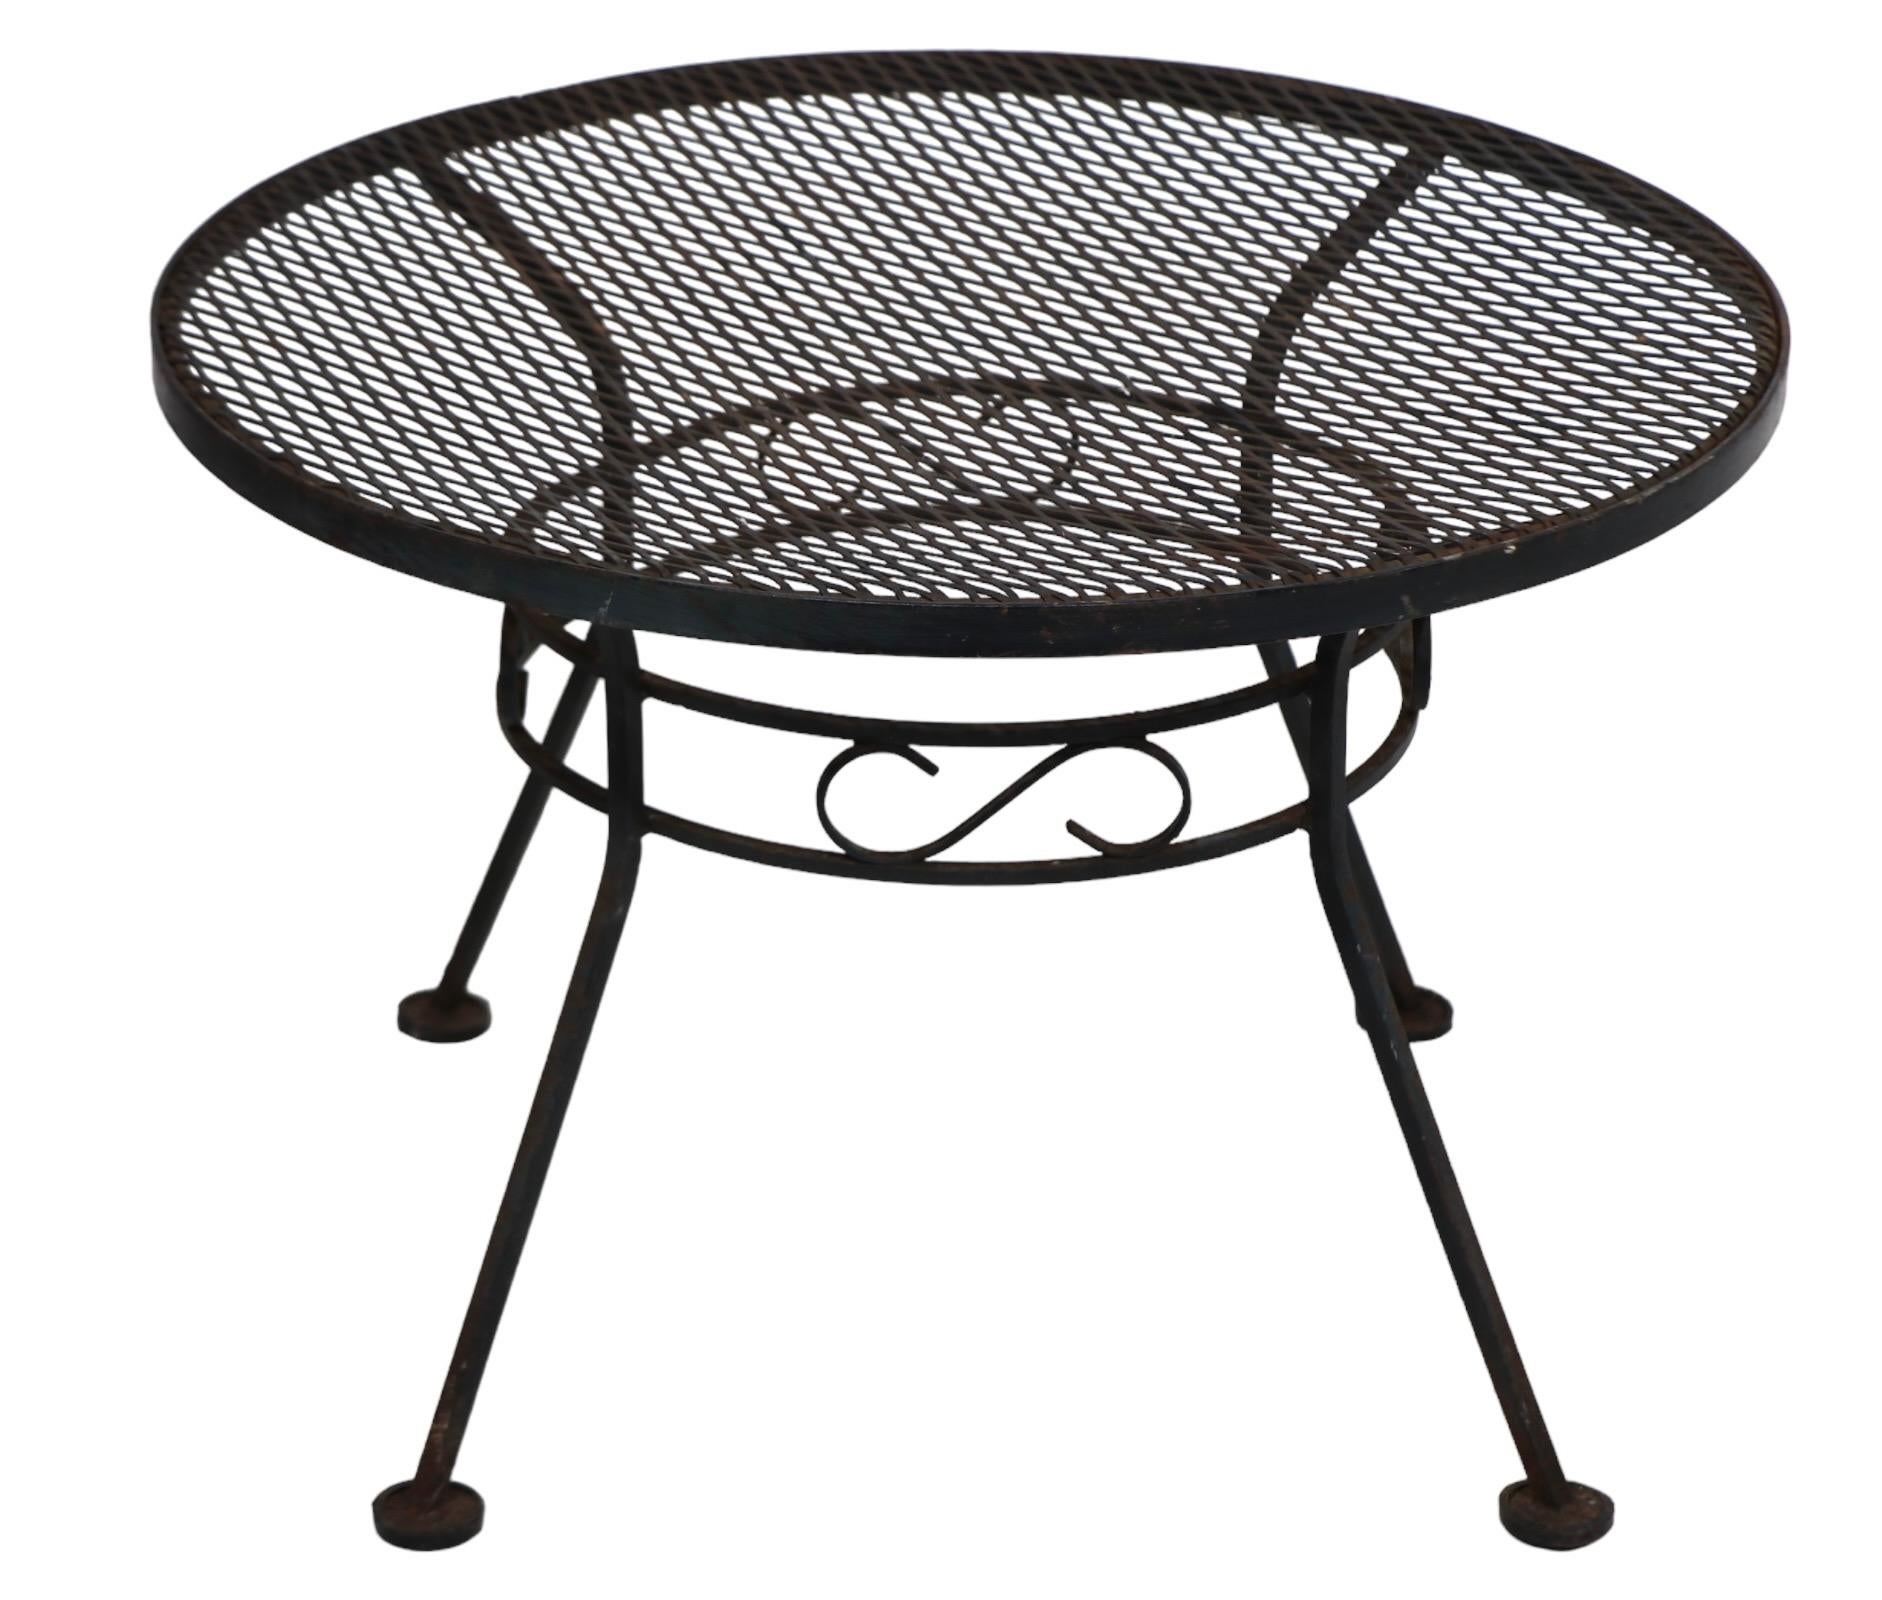  Small Wrought Iron  Garden Patio Poolside Table by Woodard c. 1940/60's For Sale 6